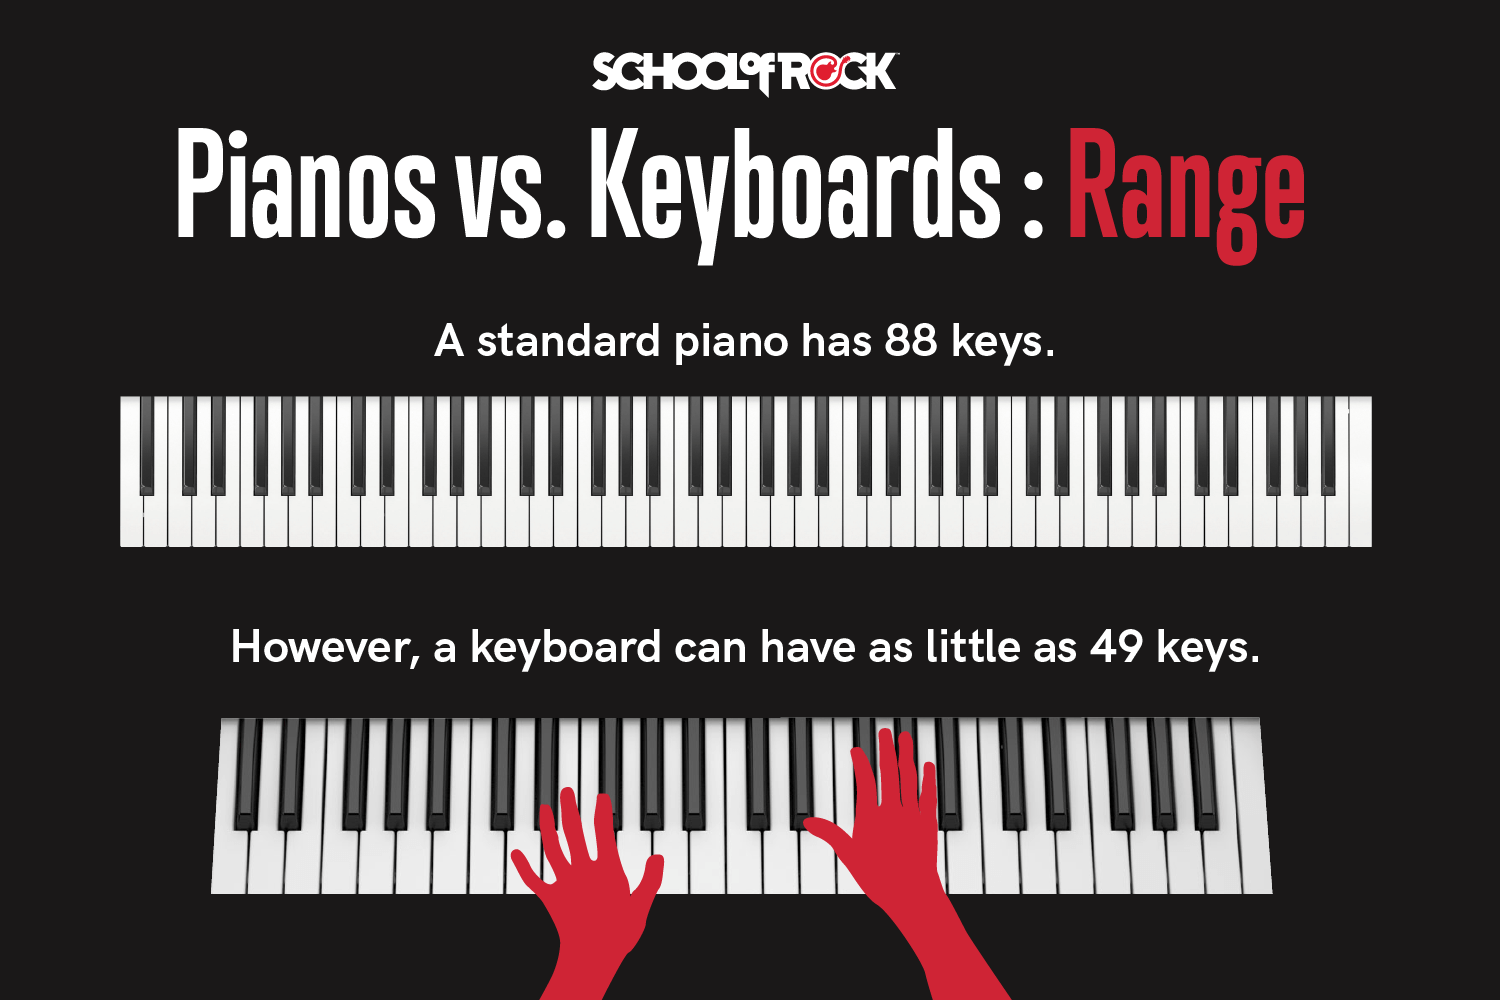 When comparing a piano versus a keyboard a standard piano has 88 keys while a keyboard can have as little as 49 keys.